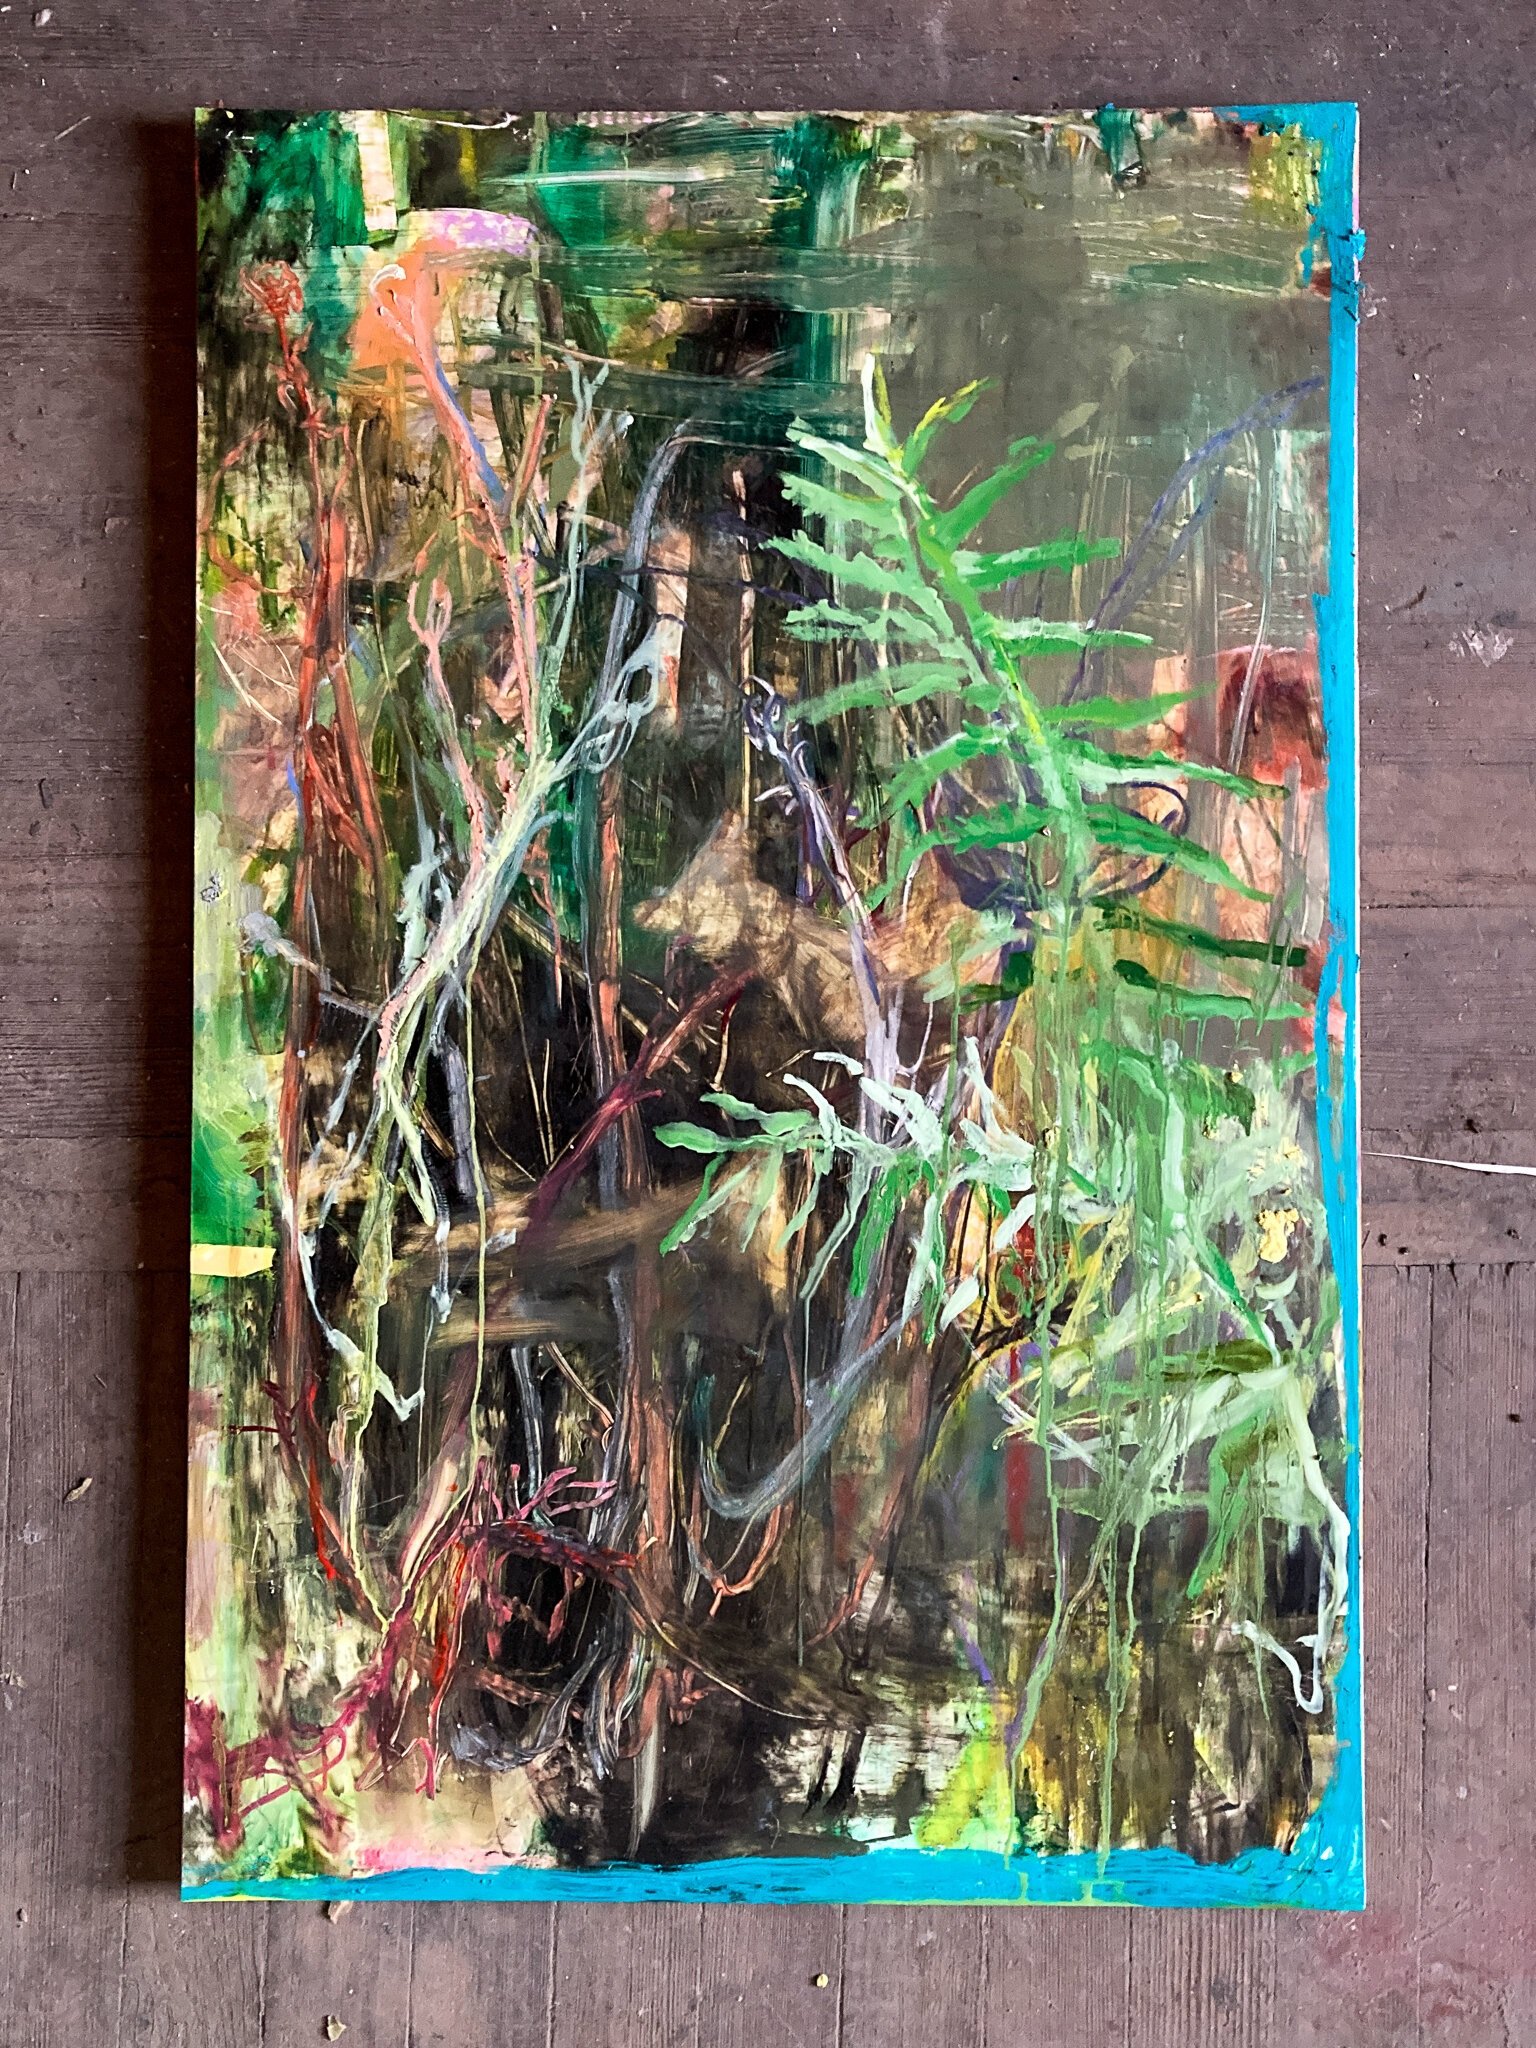  Matteuccia stuthiopteris (Ostrich fern) temperate forest study  2021  26x40”  oil on yupo on panel 